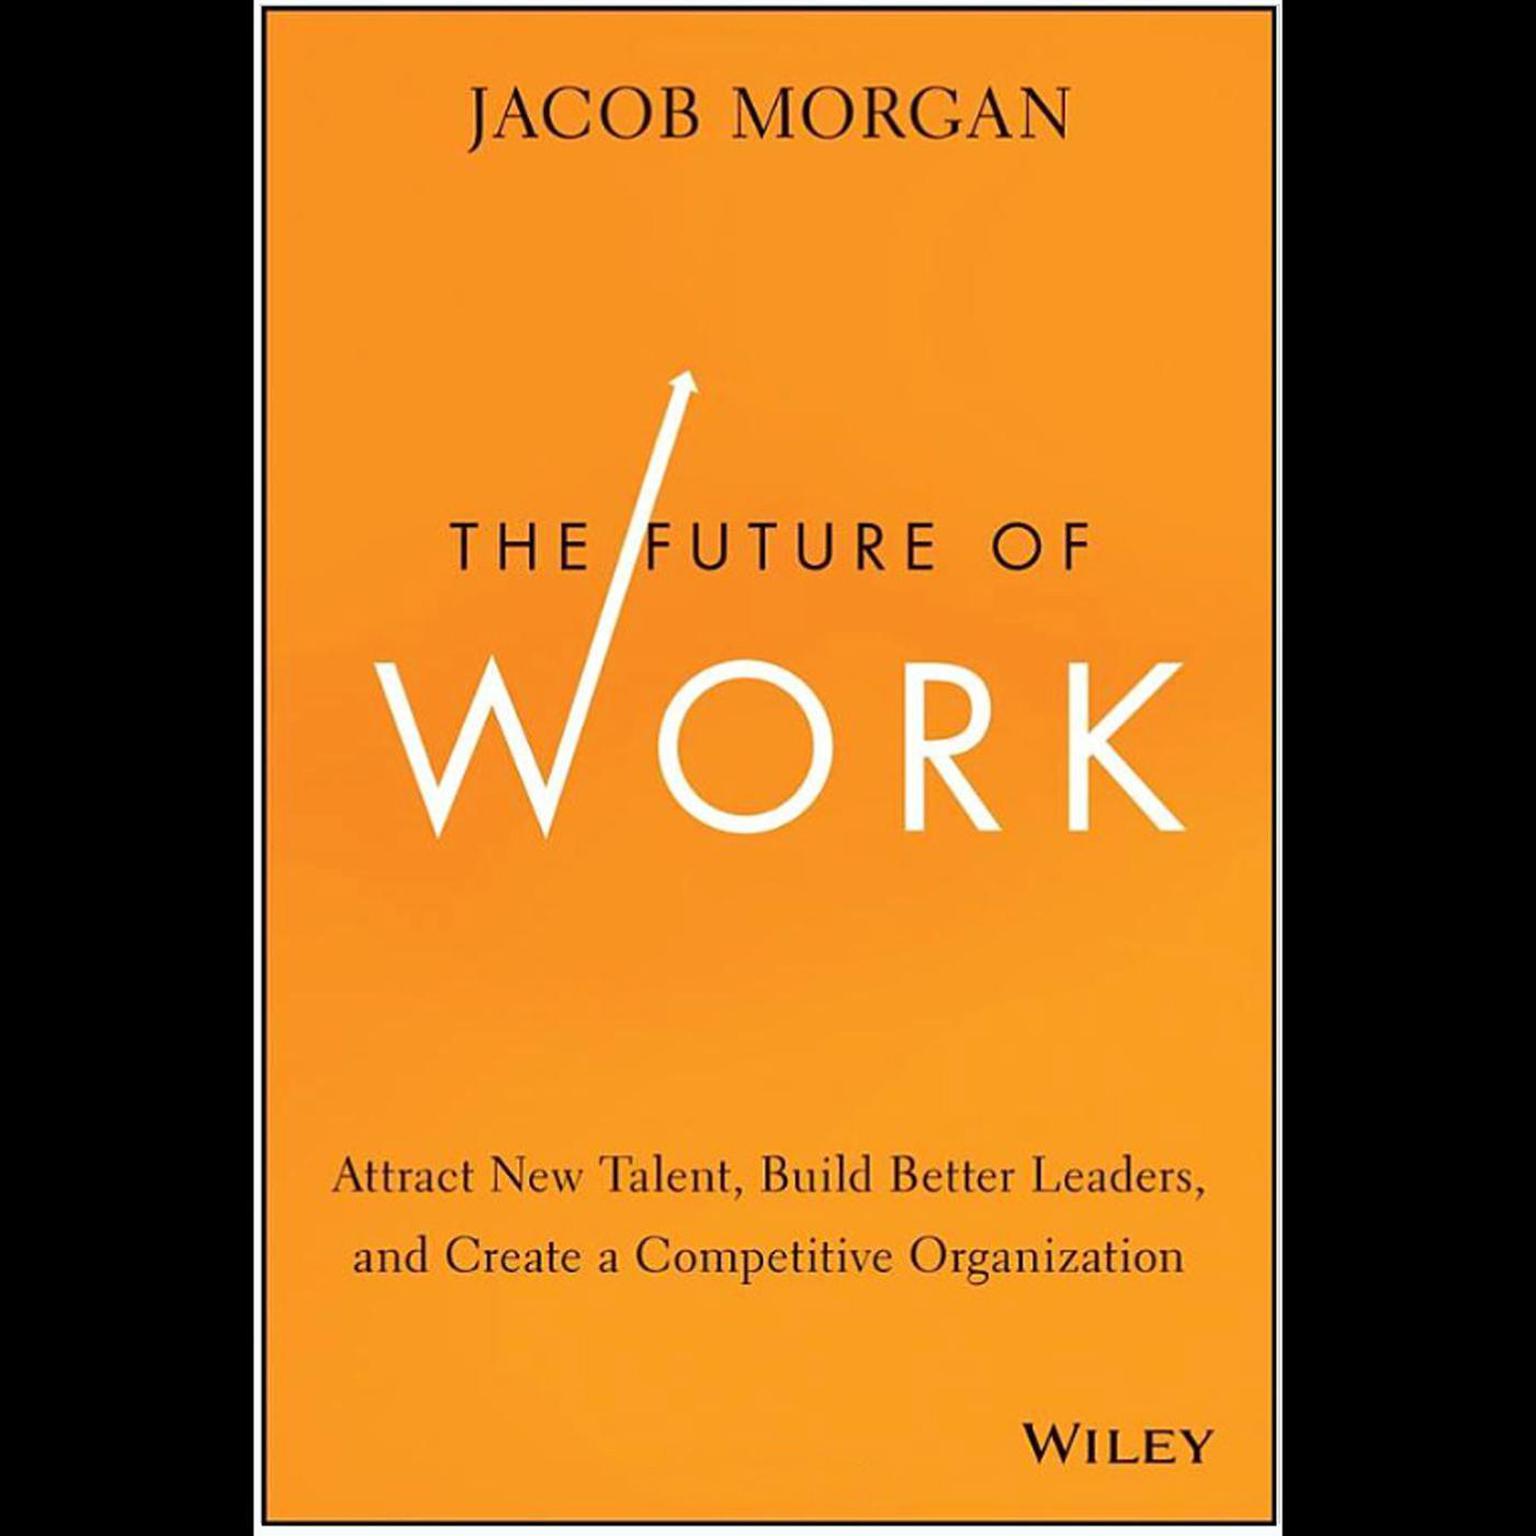 The Future of Work: Attract New Talent, Build Better Leaders, and Create a Competitive Organization Audiobook, by Jacob Morgan